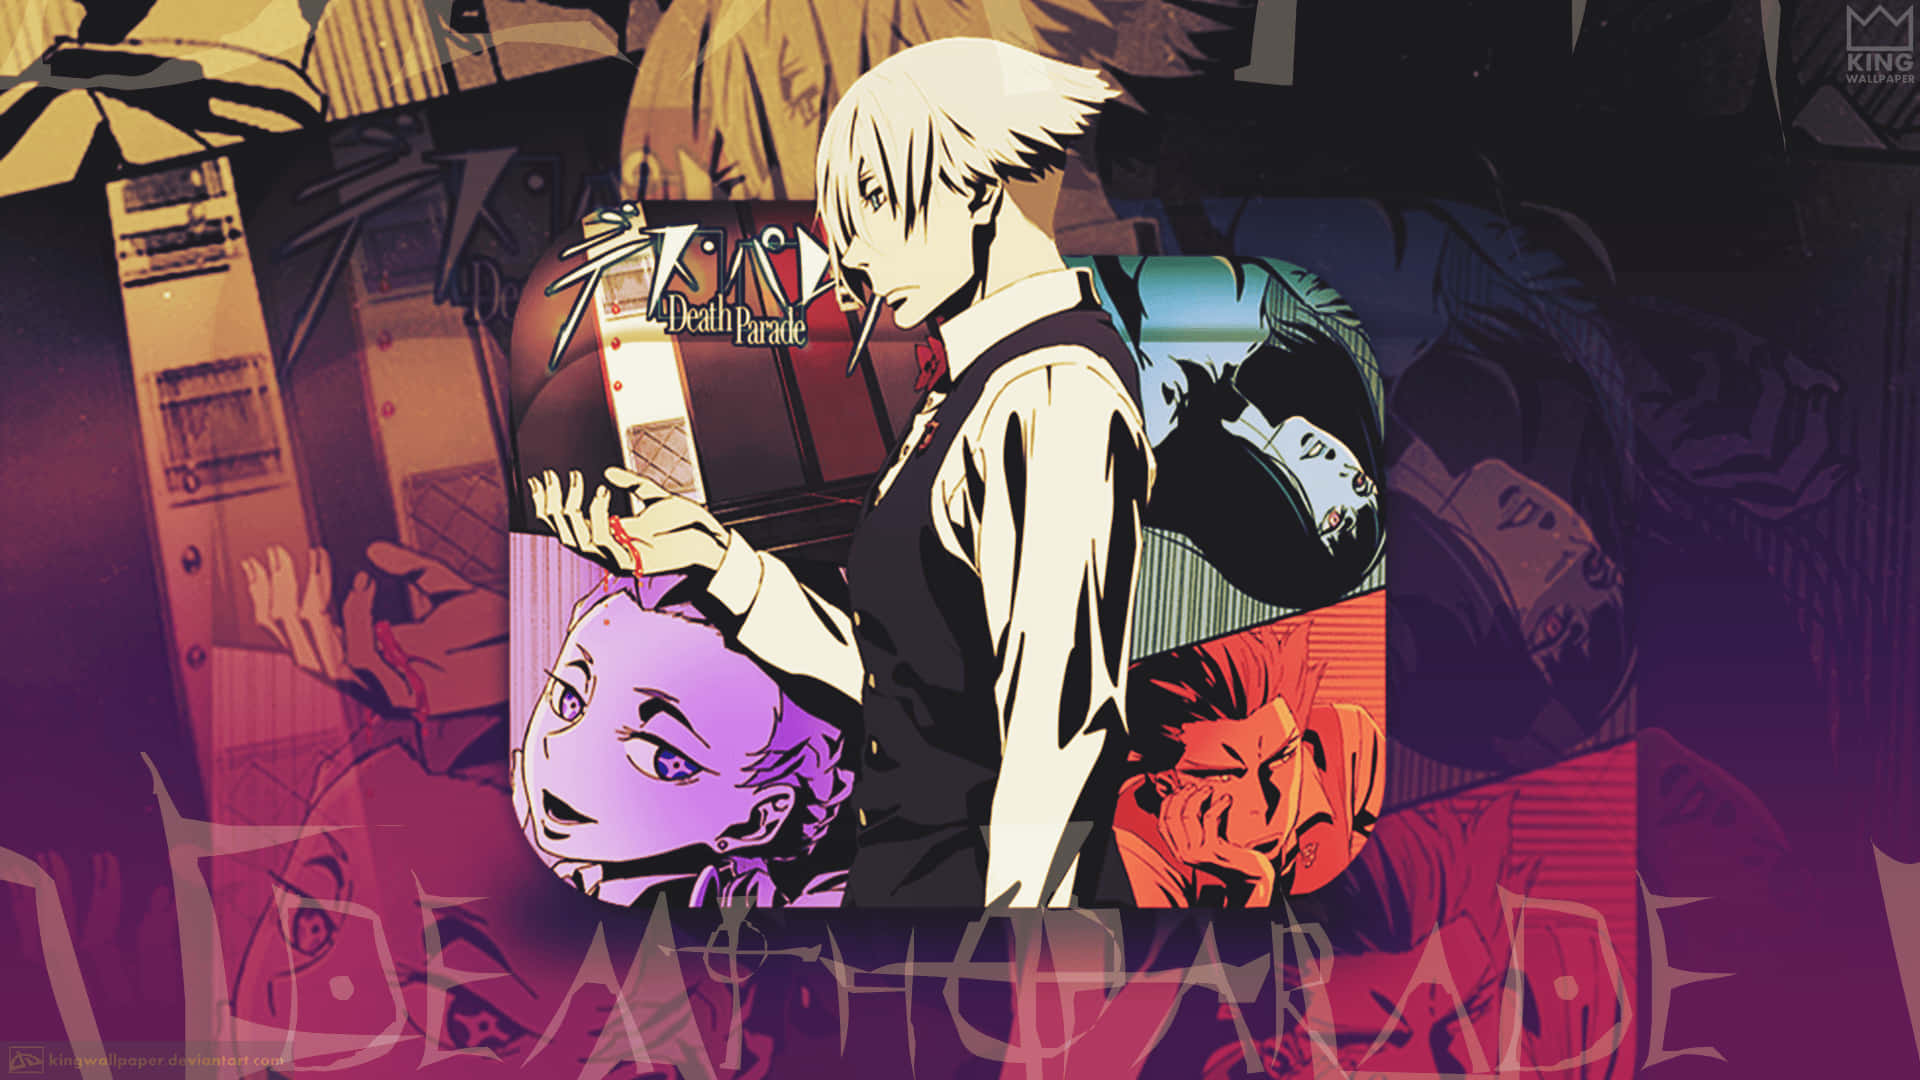 A mysterious bar called Quindecim serves as the setting of the psychological anime series, Death Parade.